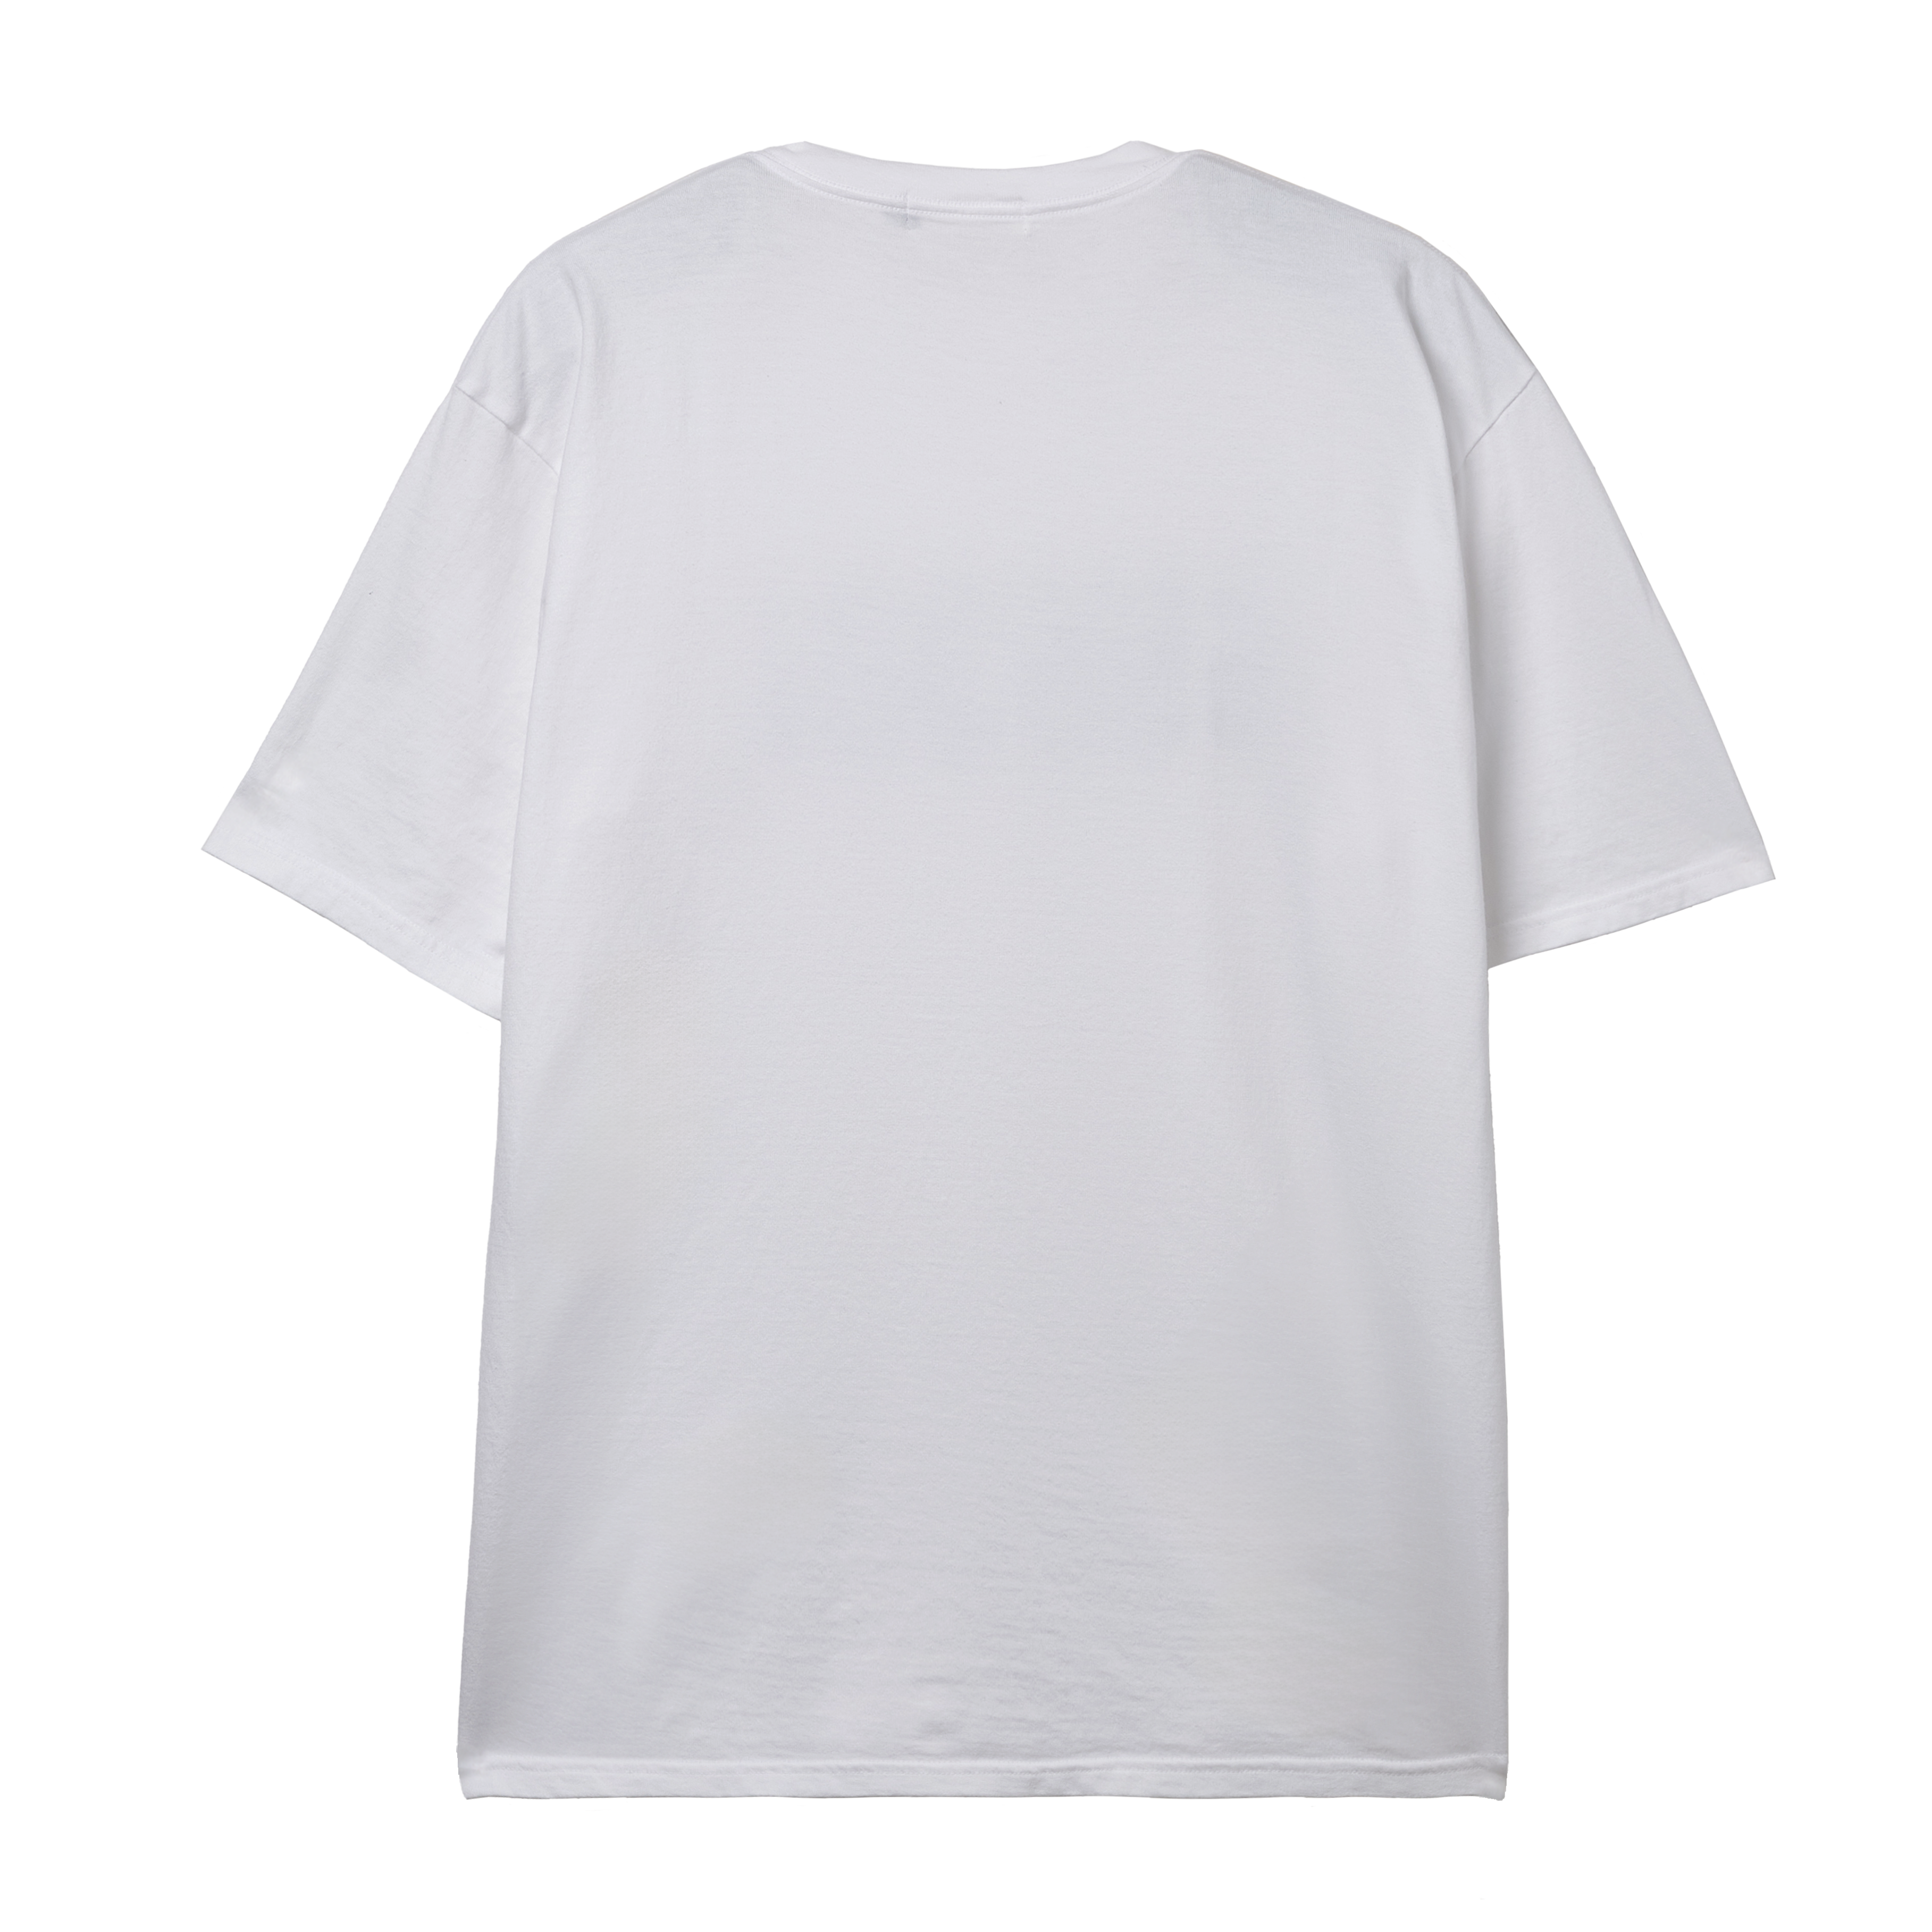 UNDERCOVER LOGO PATCH T-SHIRT WHITE